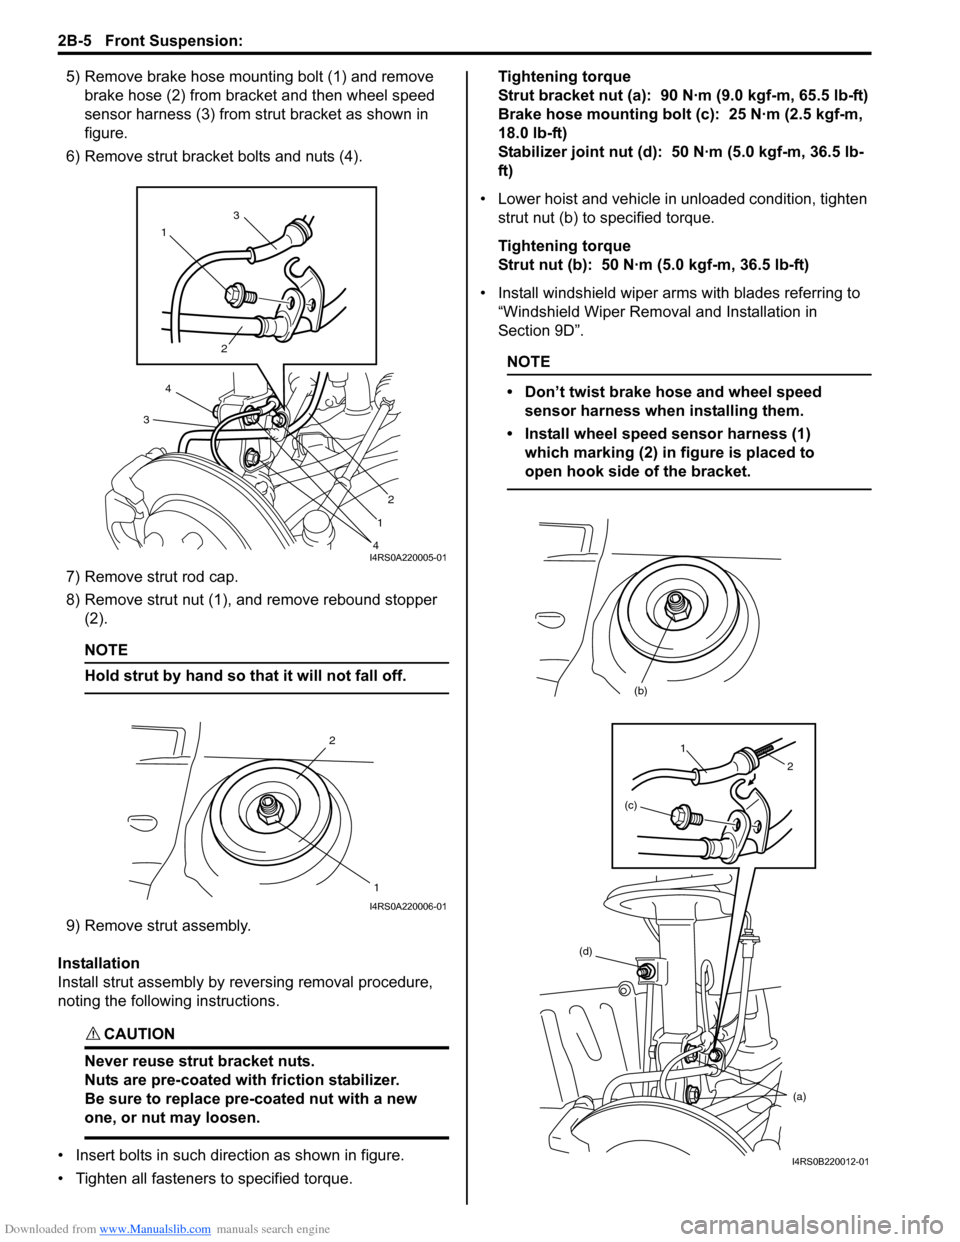 SUZUKI SWIFT 2004 2.G Service Workshop Manual Downloaded from www.Manualslib.com manuals search engine 2B-5 Front Suspension: 
5) Remove brake hose mounting bolt (1) and remove brake hose (2) from bracket and then wheel speed 
sensor harness (3) 